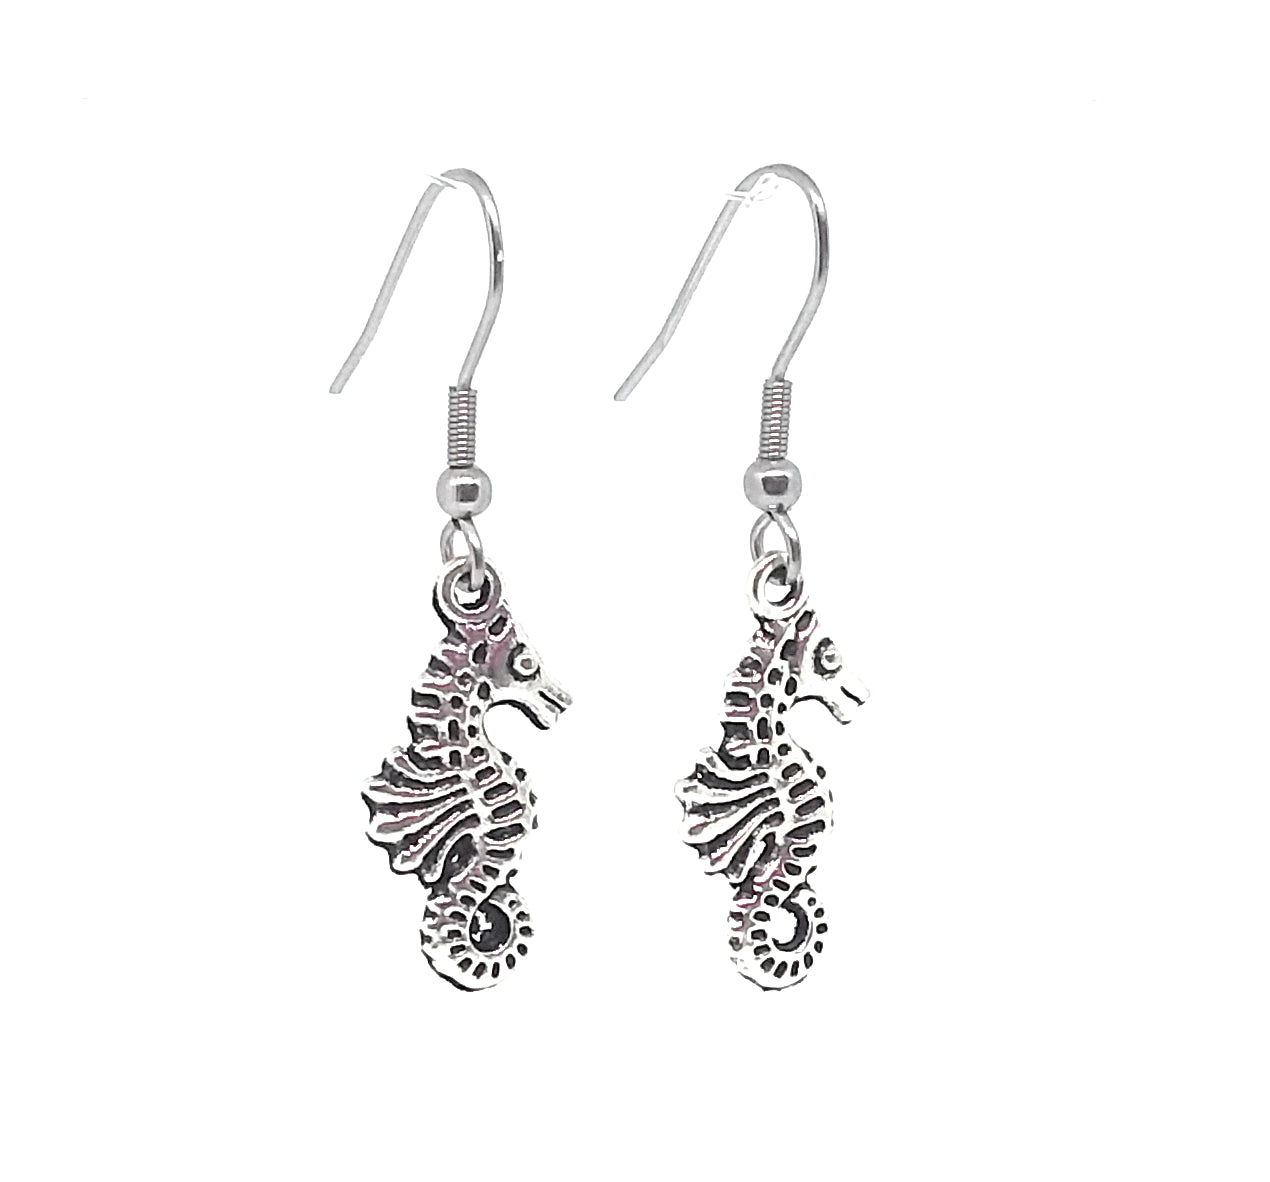 Seahorse Charm Dangle Earrings with Stainless Steel Ear Wires